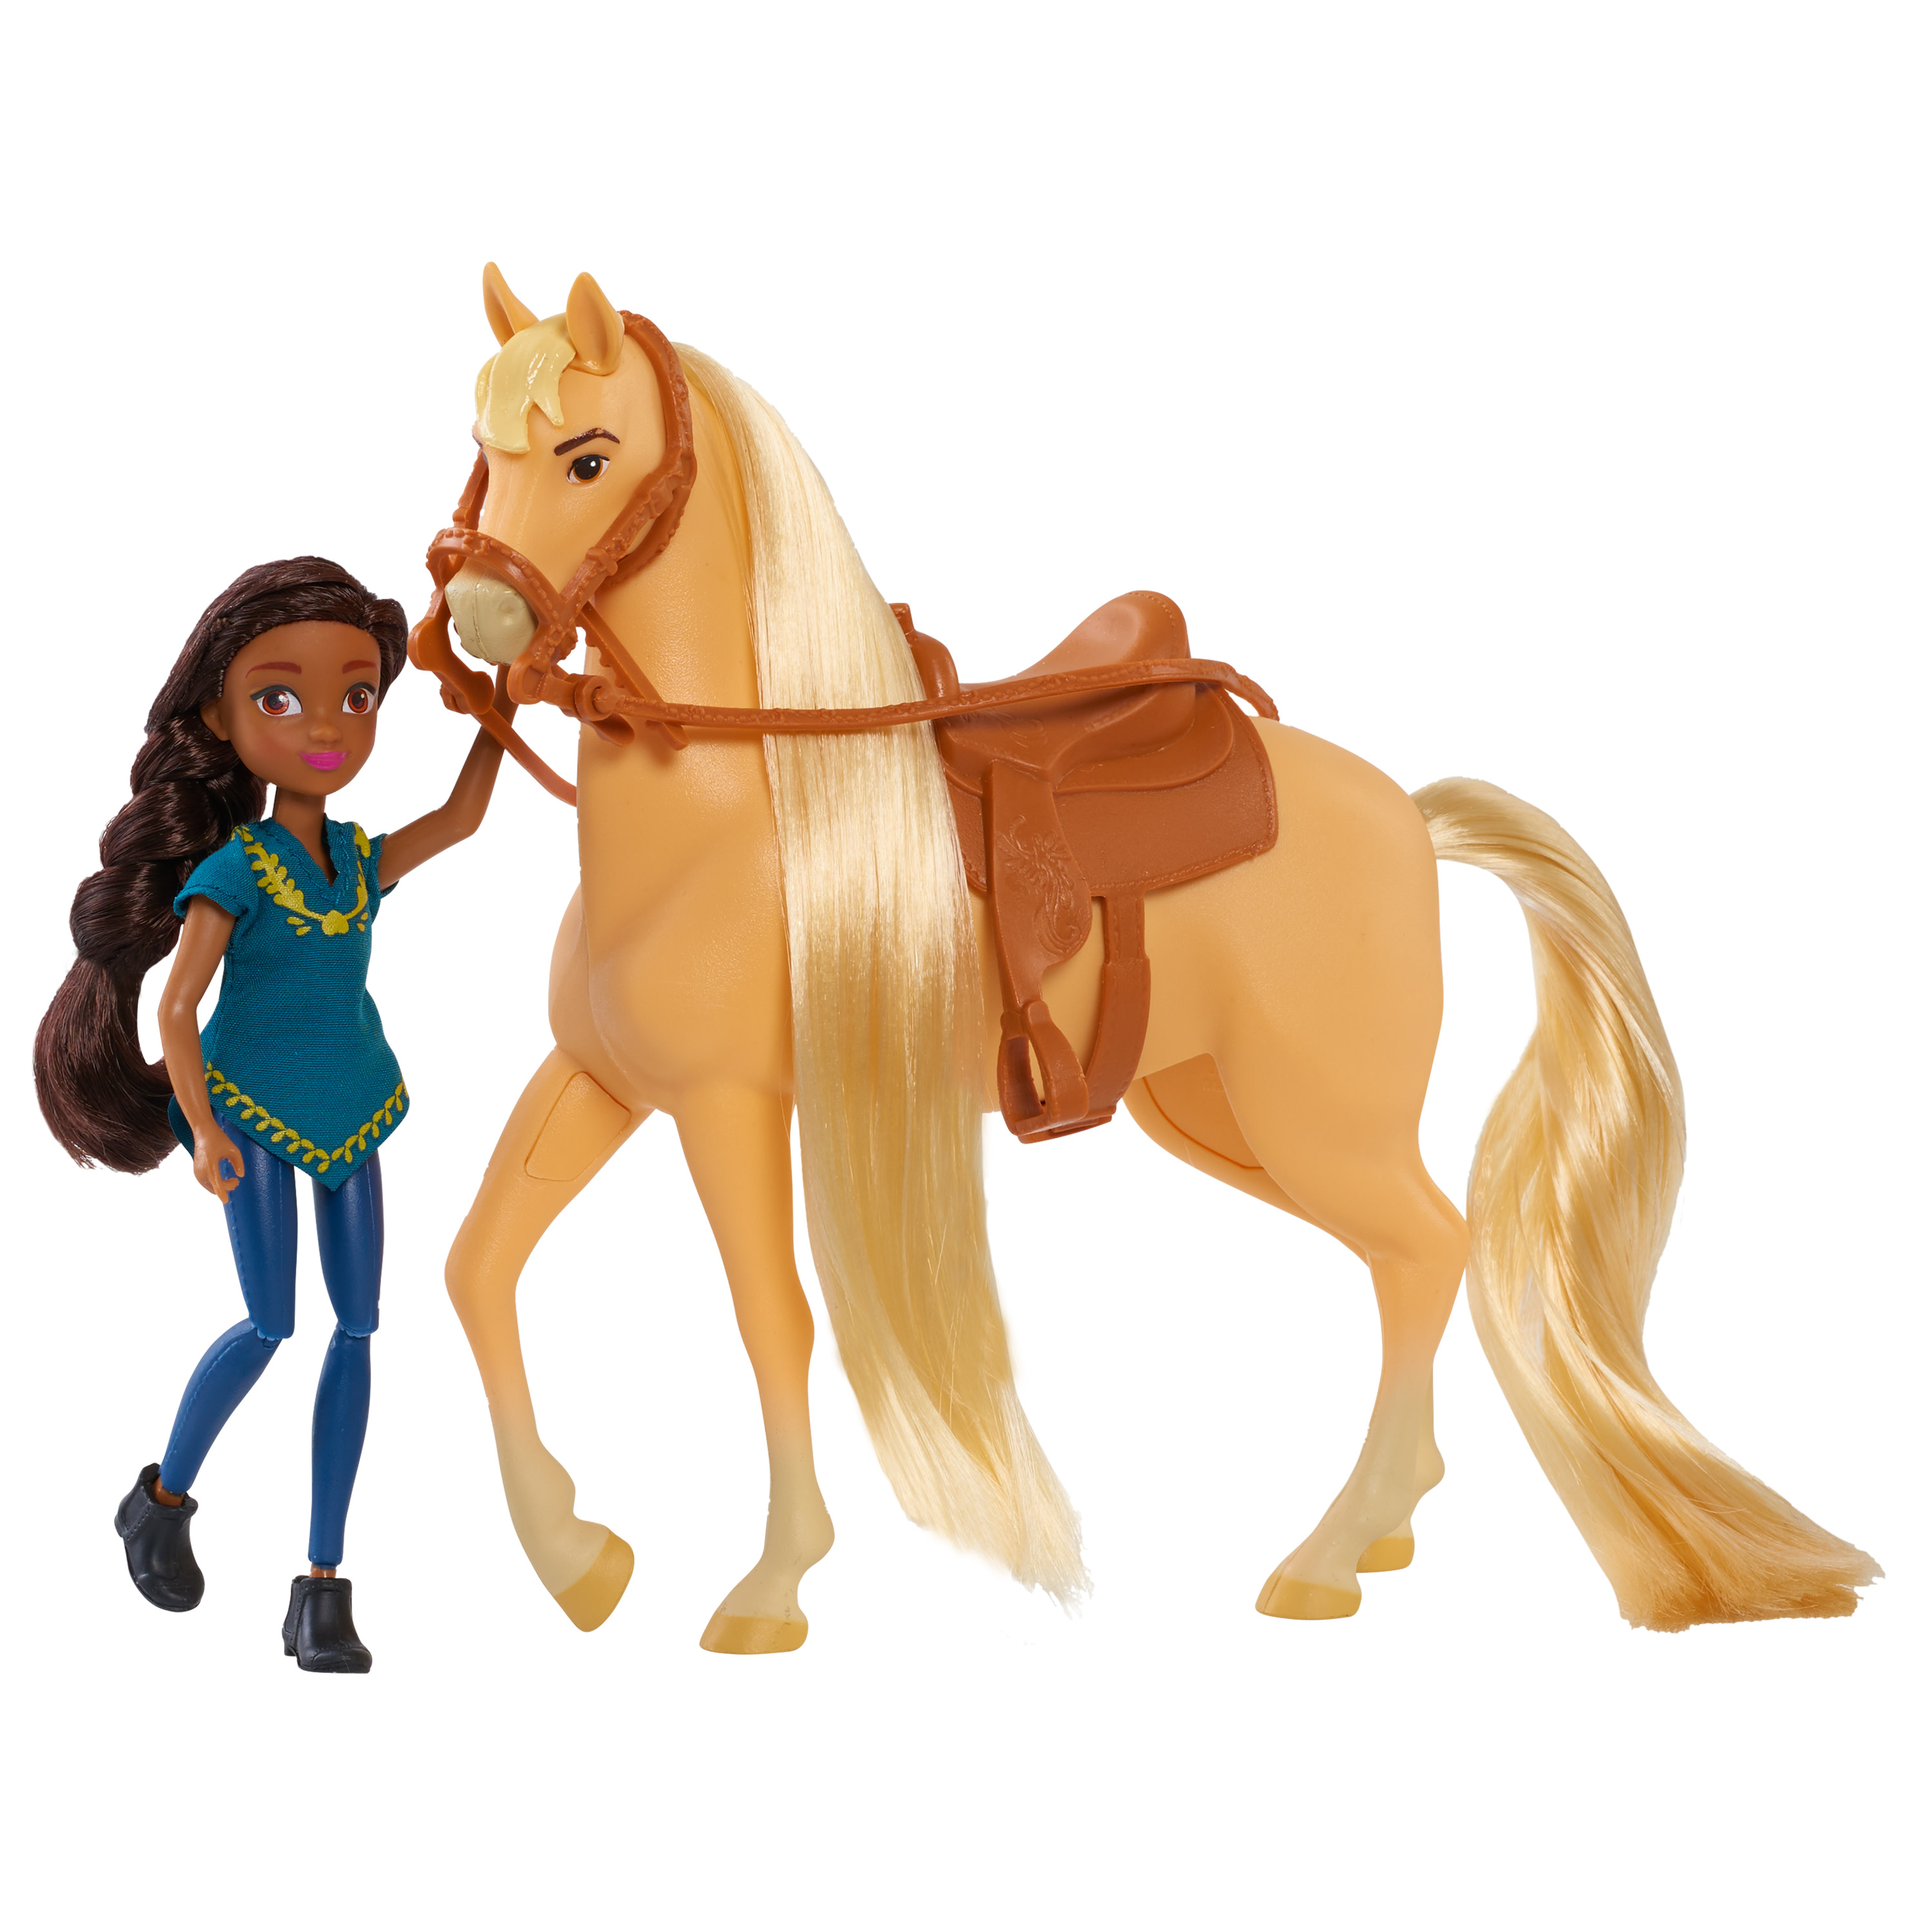 Spirit Riding Free Small Doll and Horse Set - Pru & Chica Linda - image 3 of 4